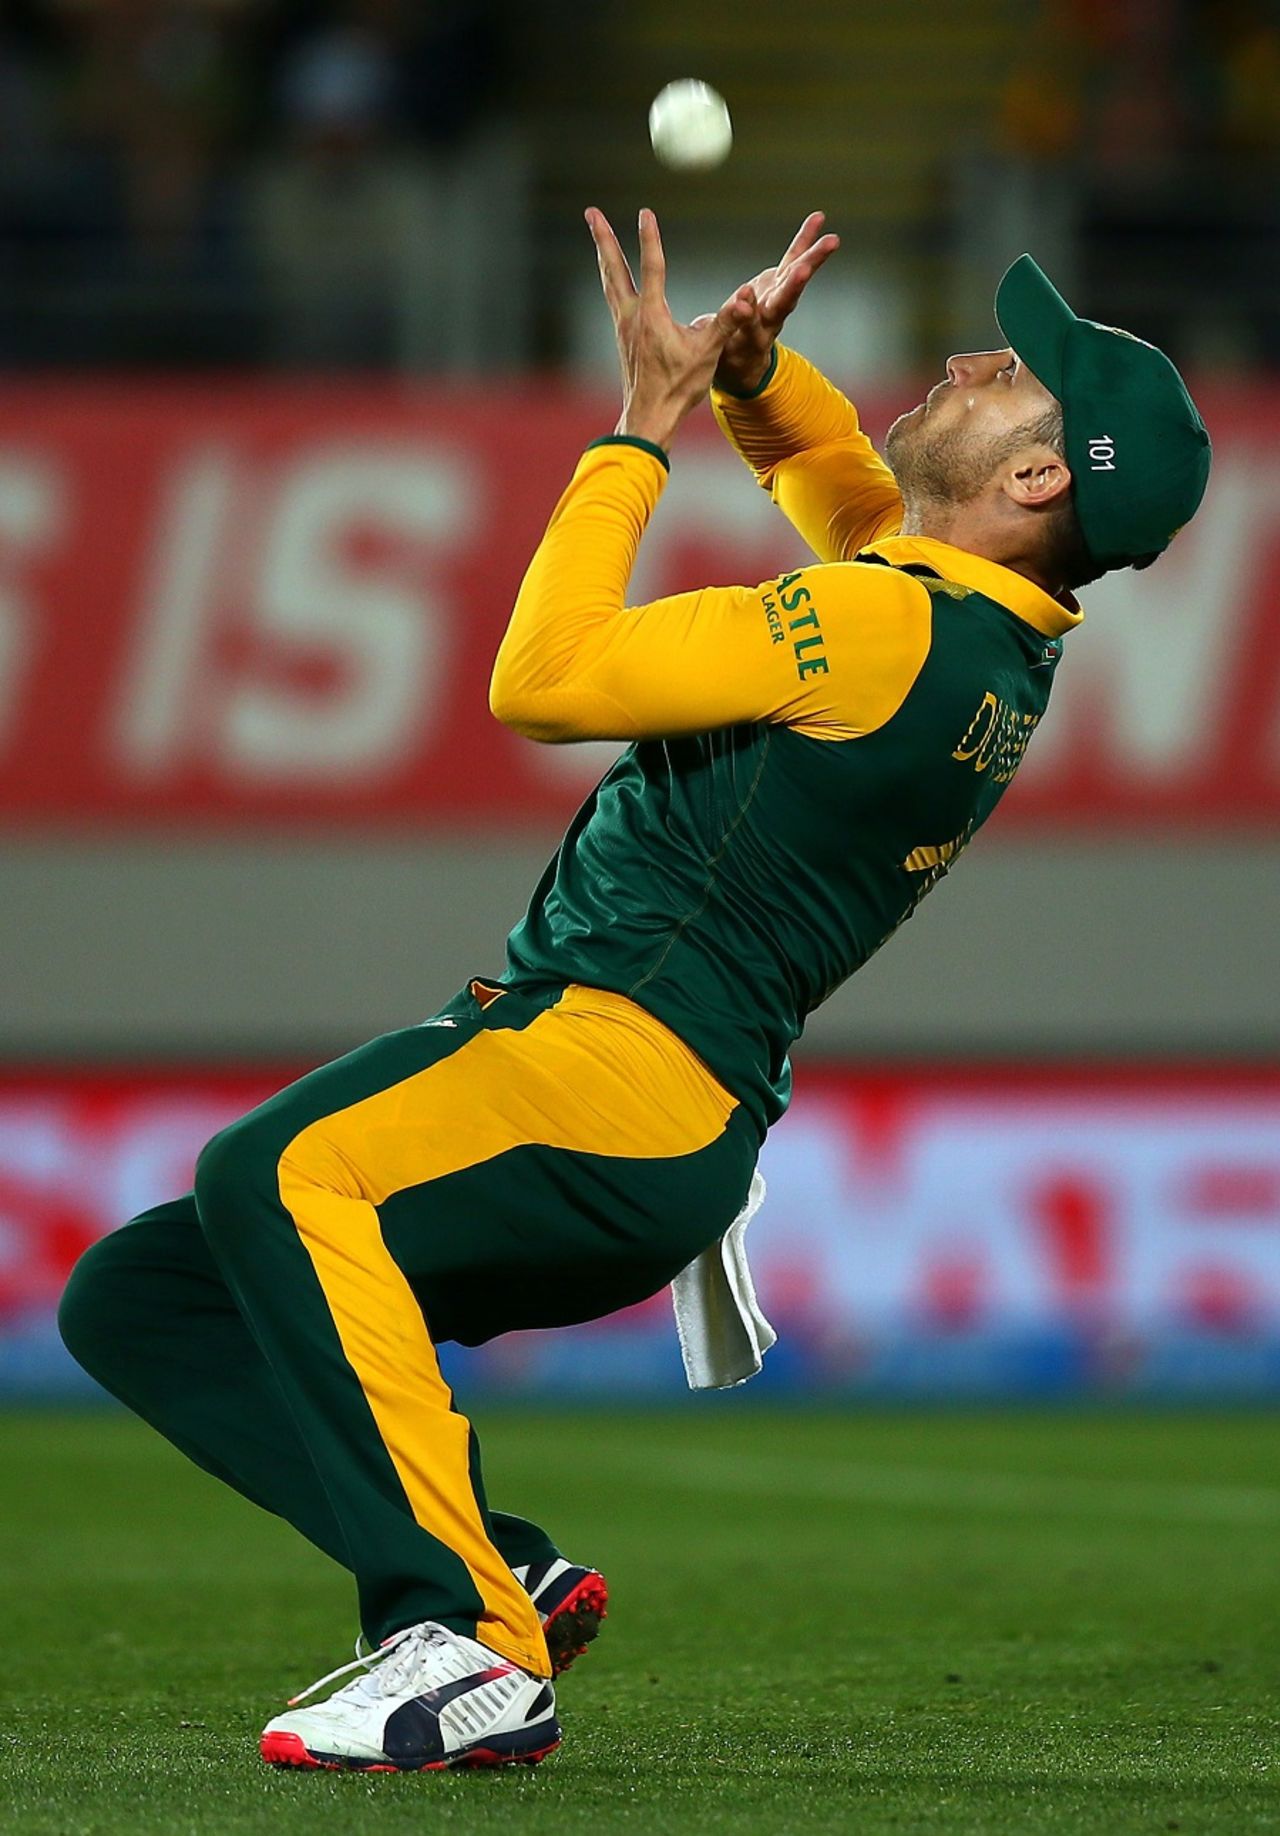 Faf du Plessis was ice-cool under a skier, New Zealand v South Africa, World Cup 2015, 1st Semi-Final, Auckland, March 24, 2015